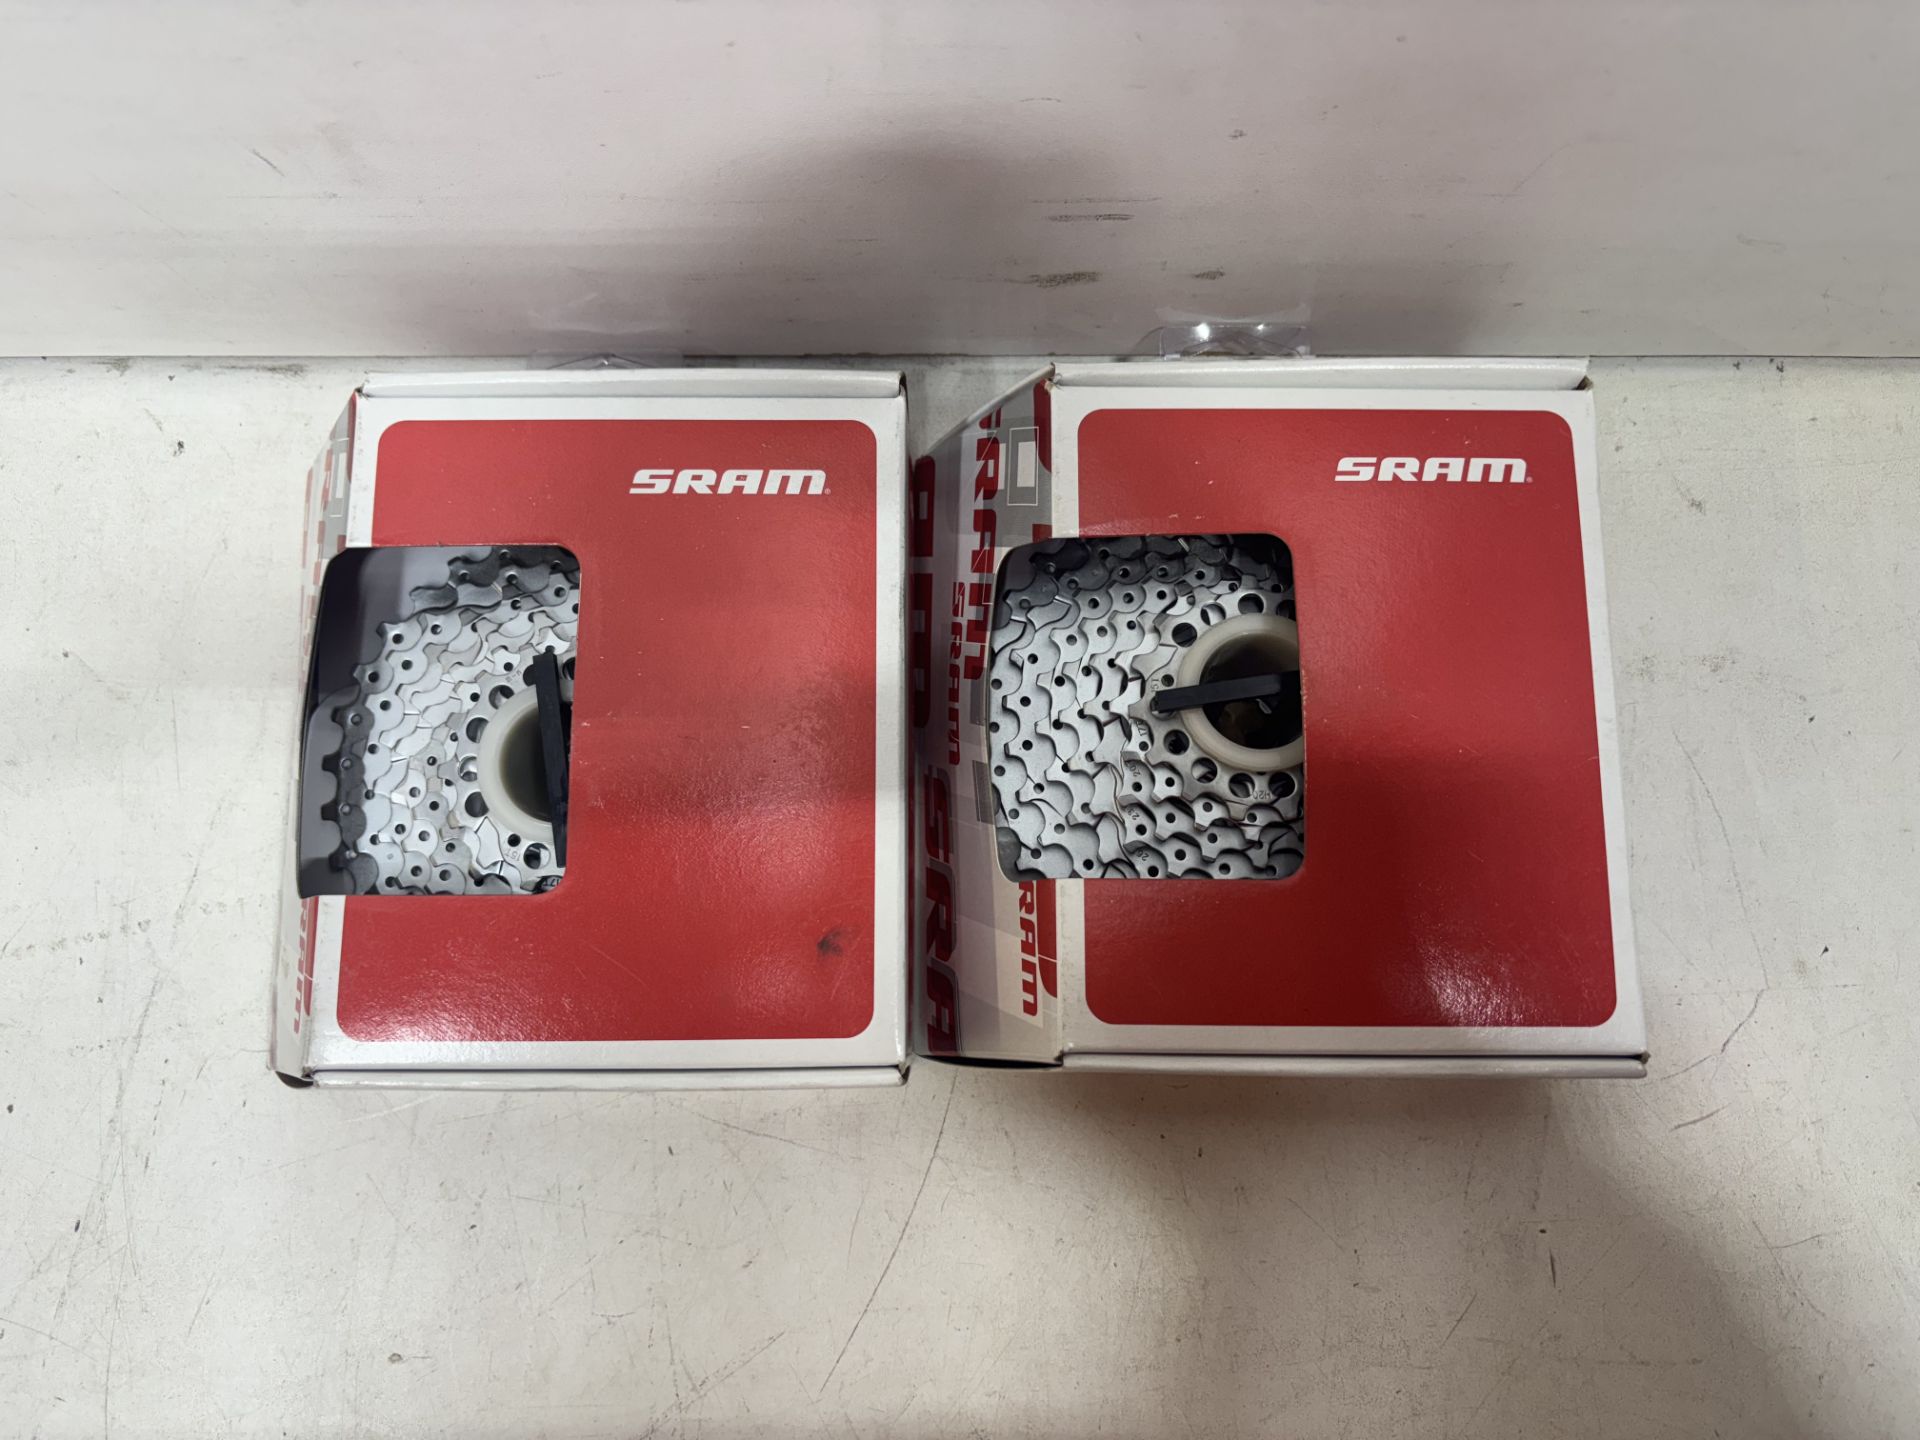 2 x SRAM PG-970 S-series 11-34 9 speed Cassettes - Image 2 of 3